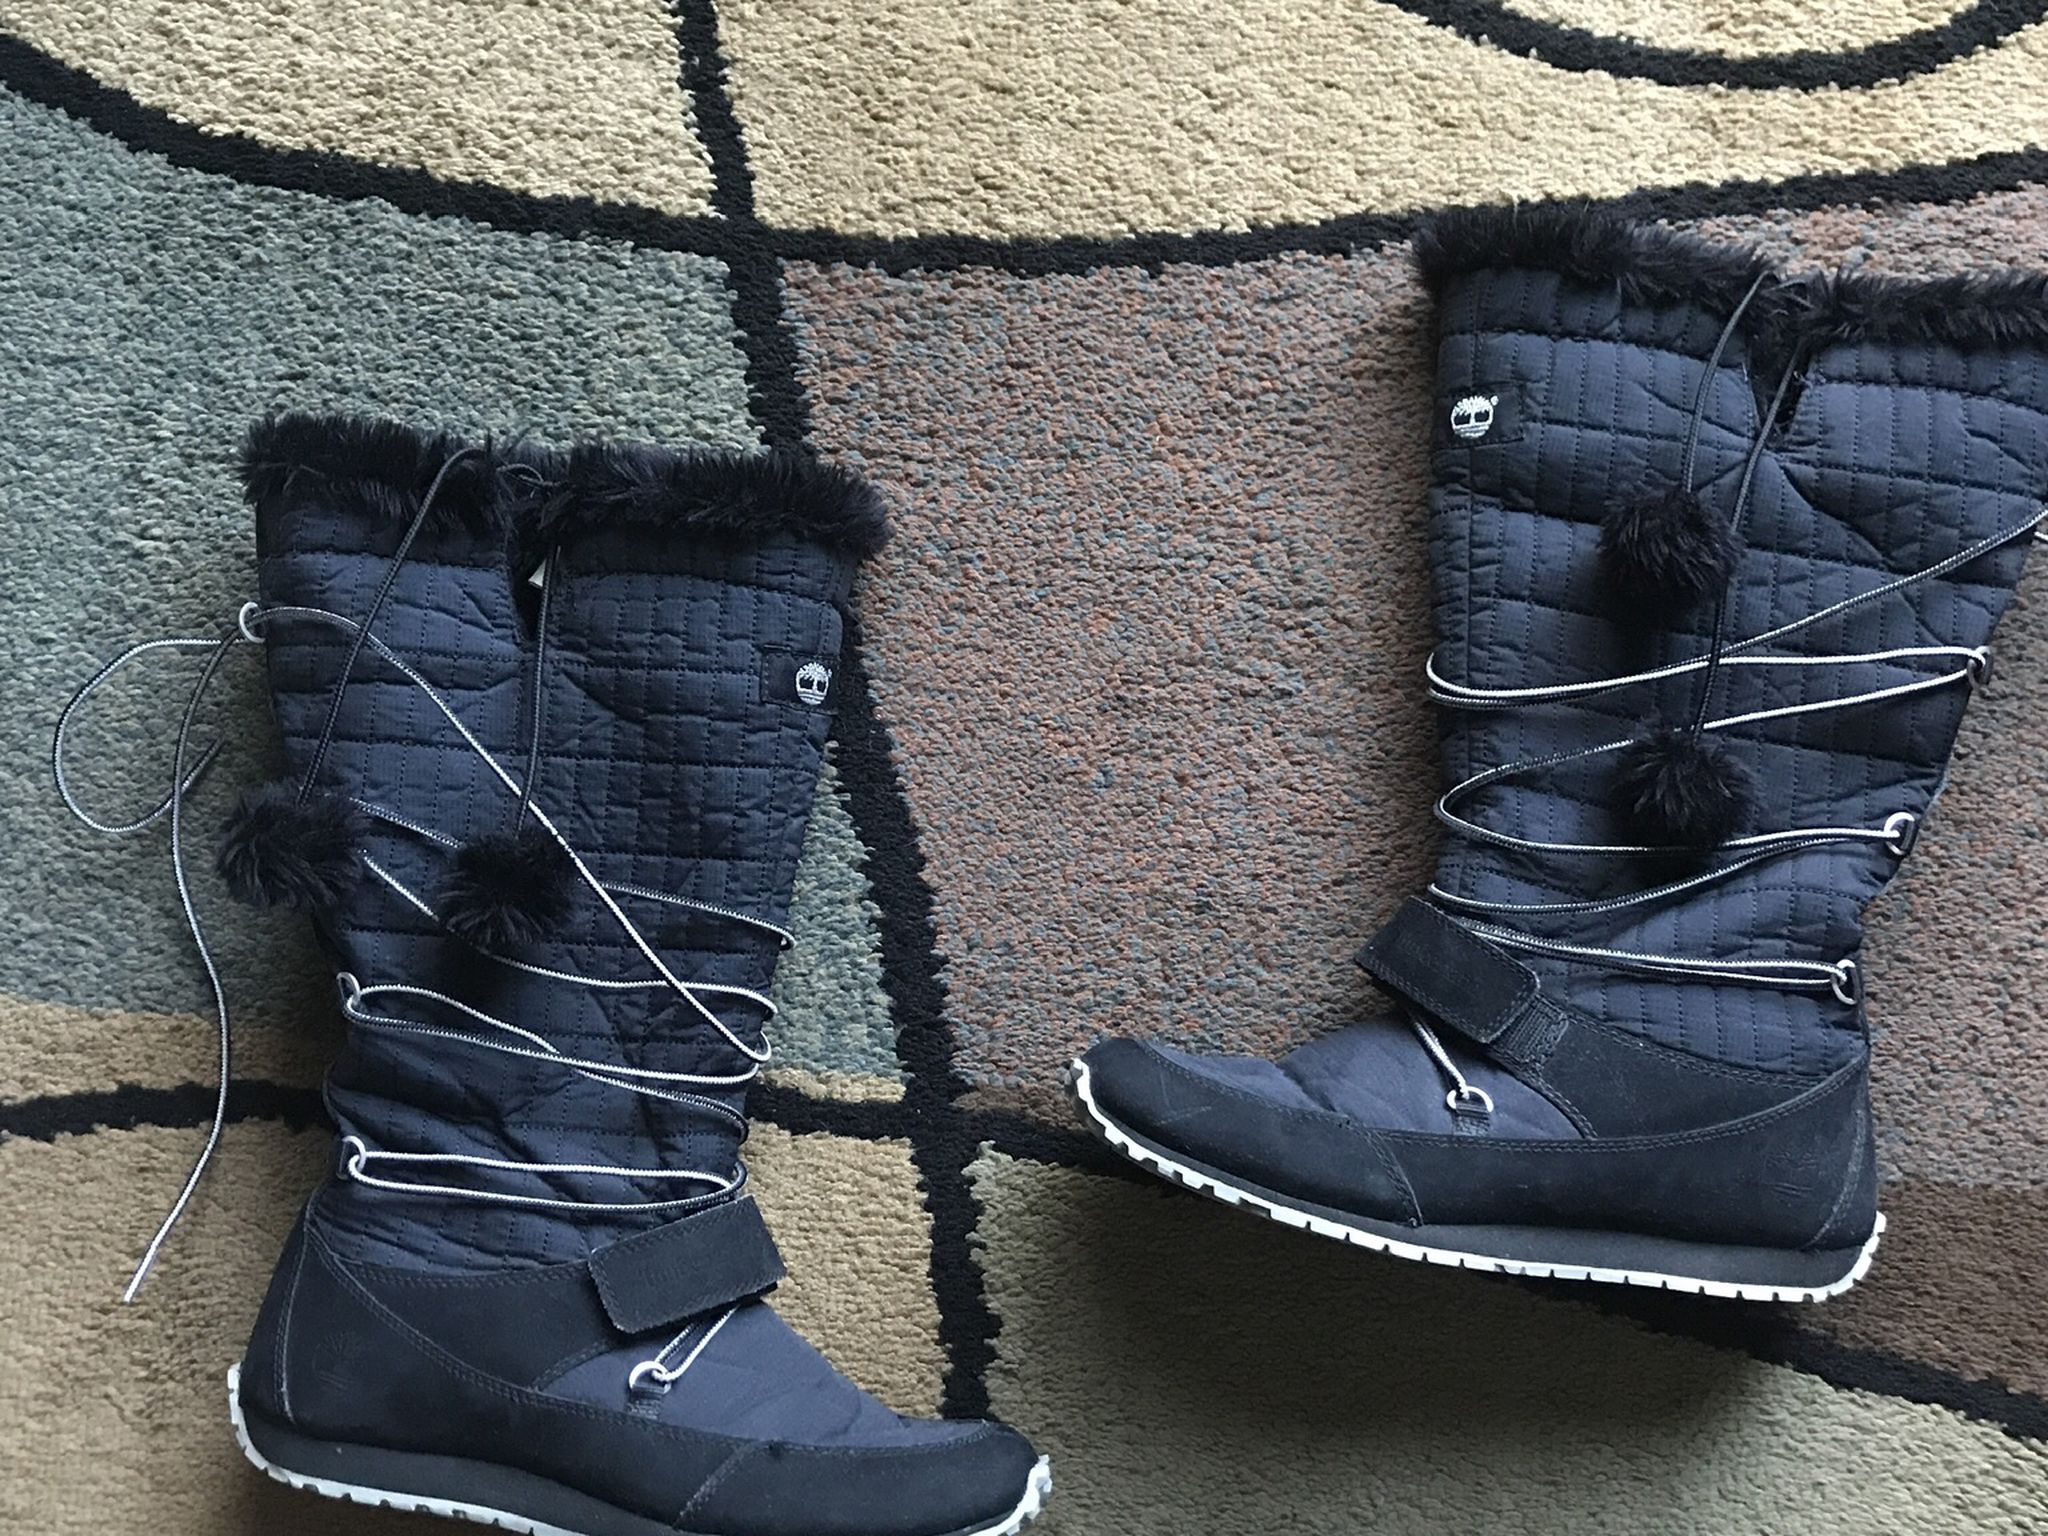 Ladies Timberland Winter Boots - Size 9 These are several years old, but are in good condition with light wear and marks. They have some fur in them